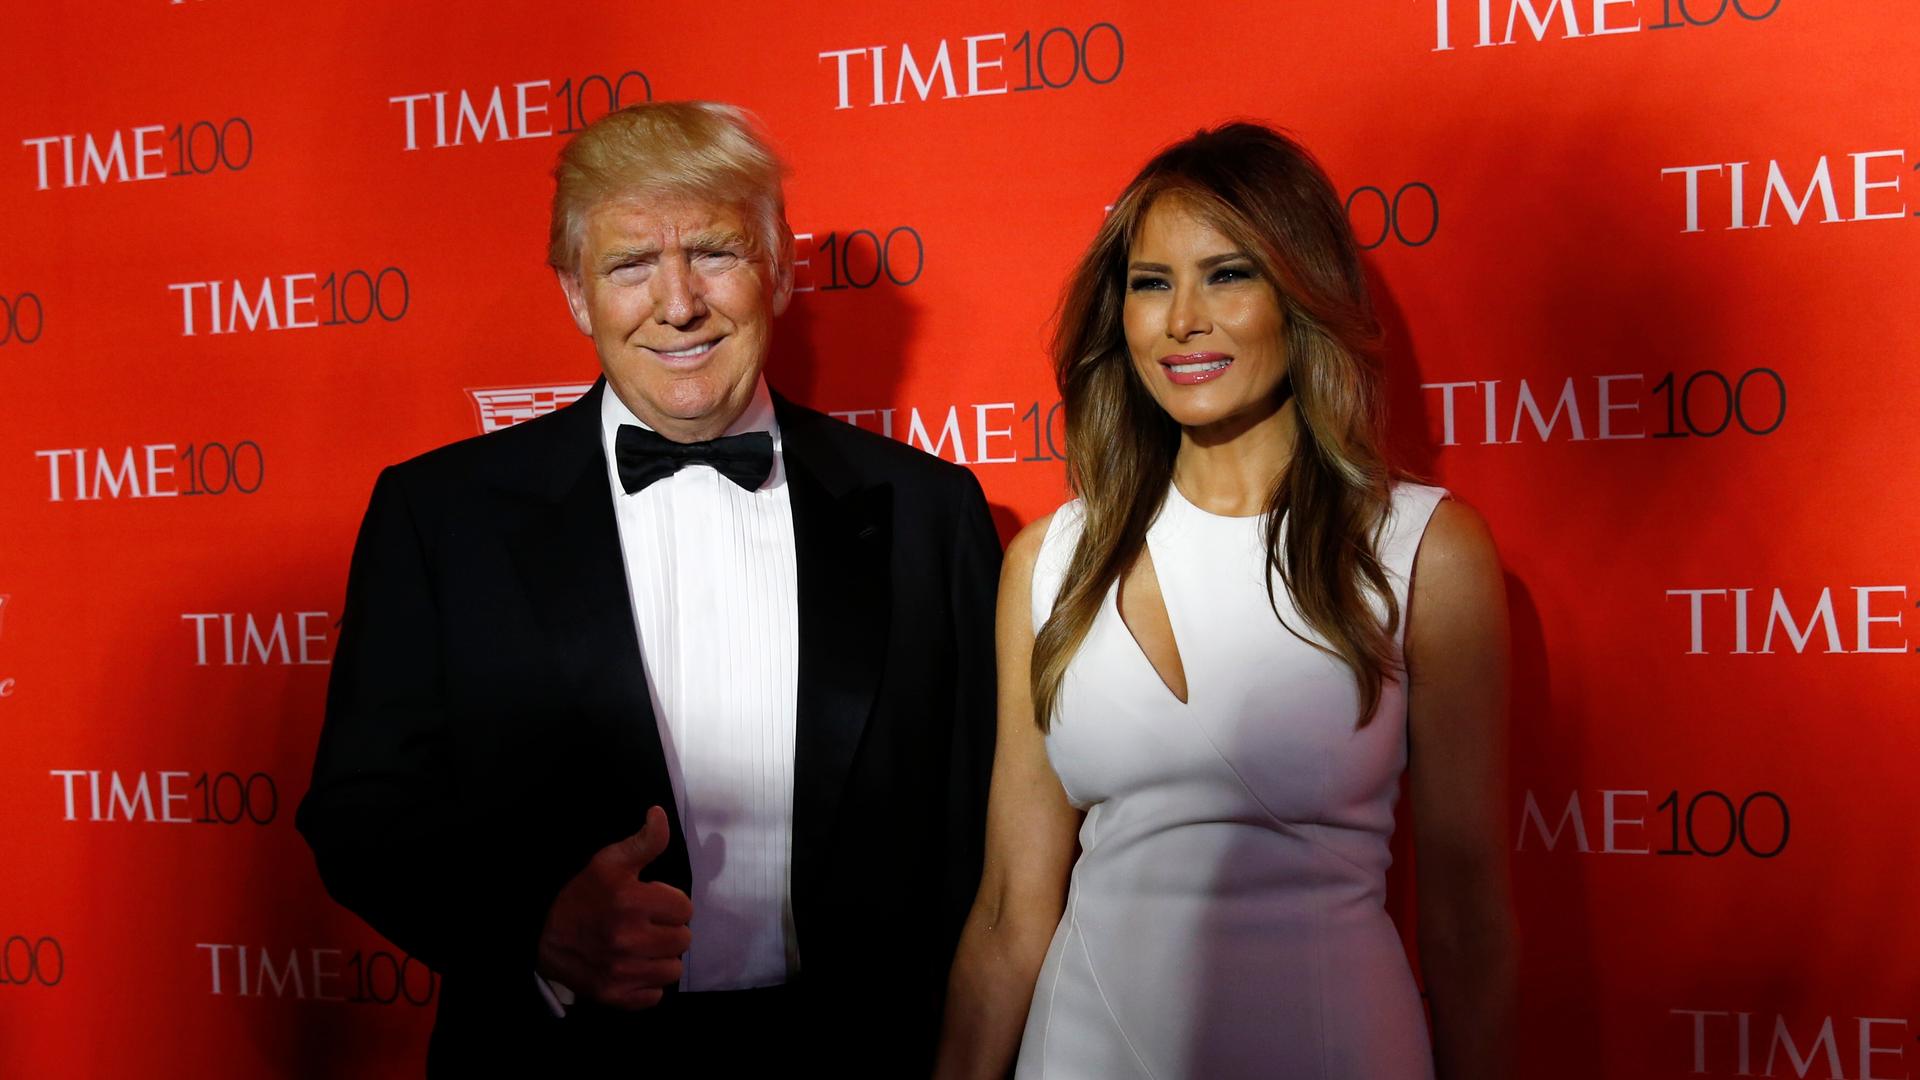 Donald Trump and his wife, Melania, pose on the red carpet as they arrive for a gala event in New York, April 26th 2016. 